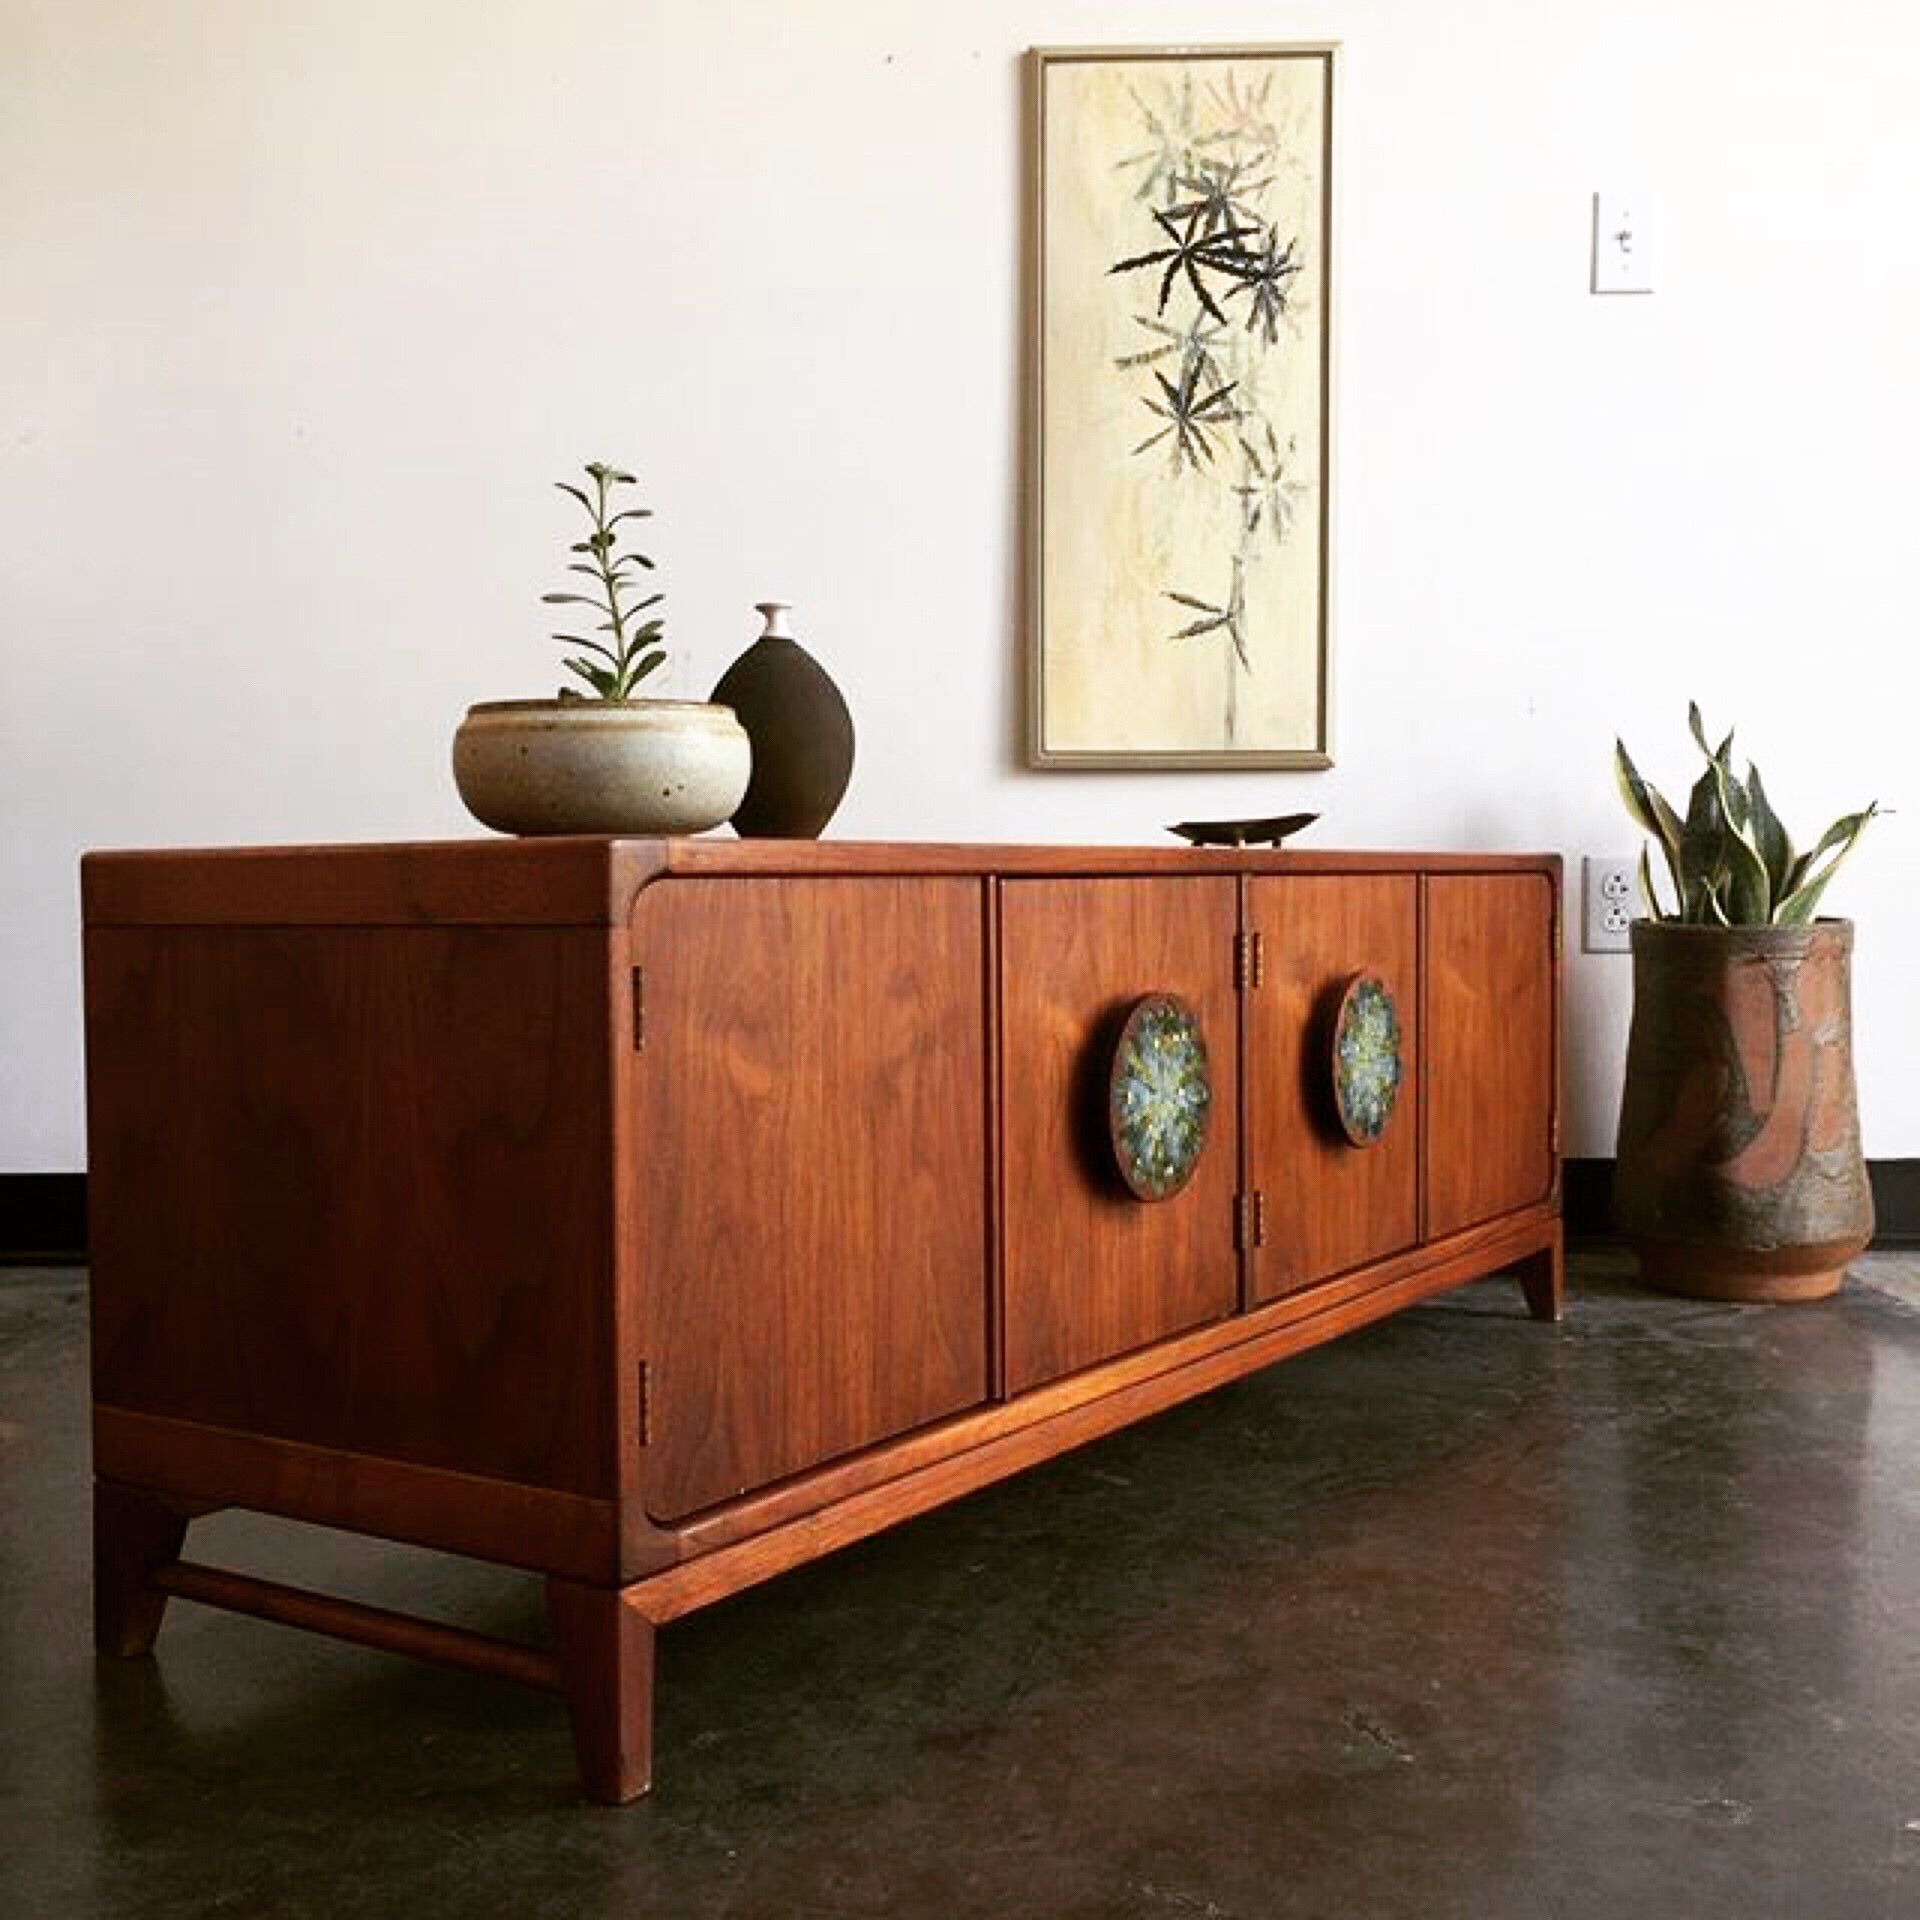 A Midcentury Modern Credenza Looking Very Much At Home With With Regard To Retro Holistic Credenzas (Photo 6 of 30)